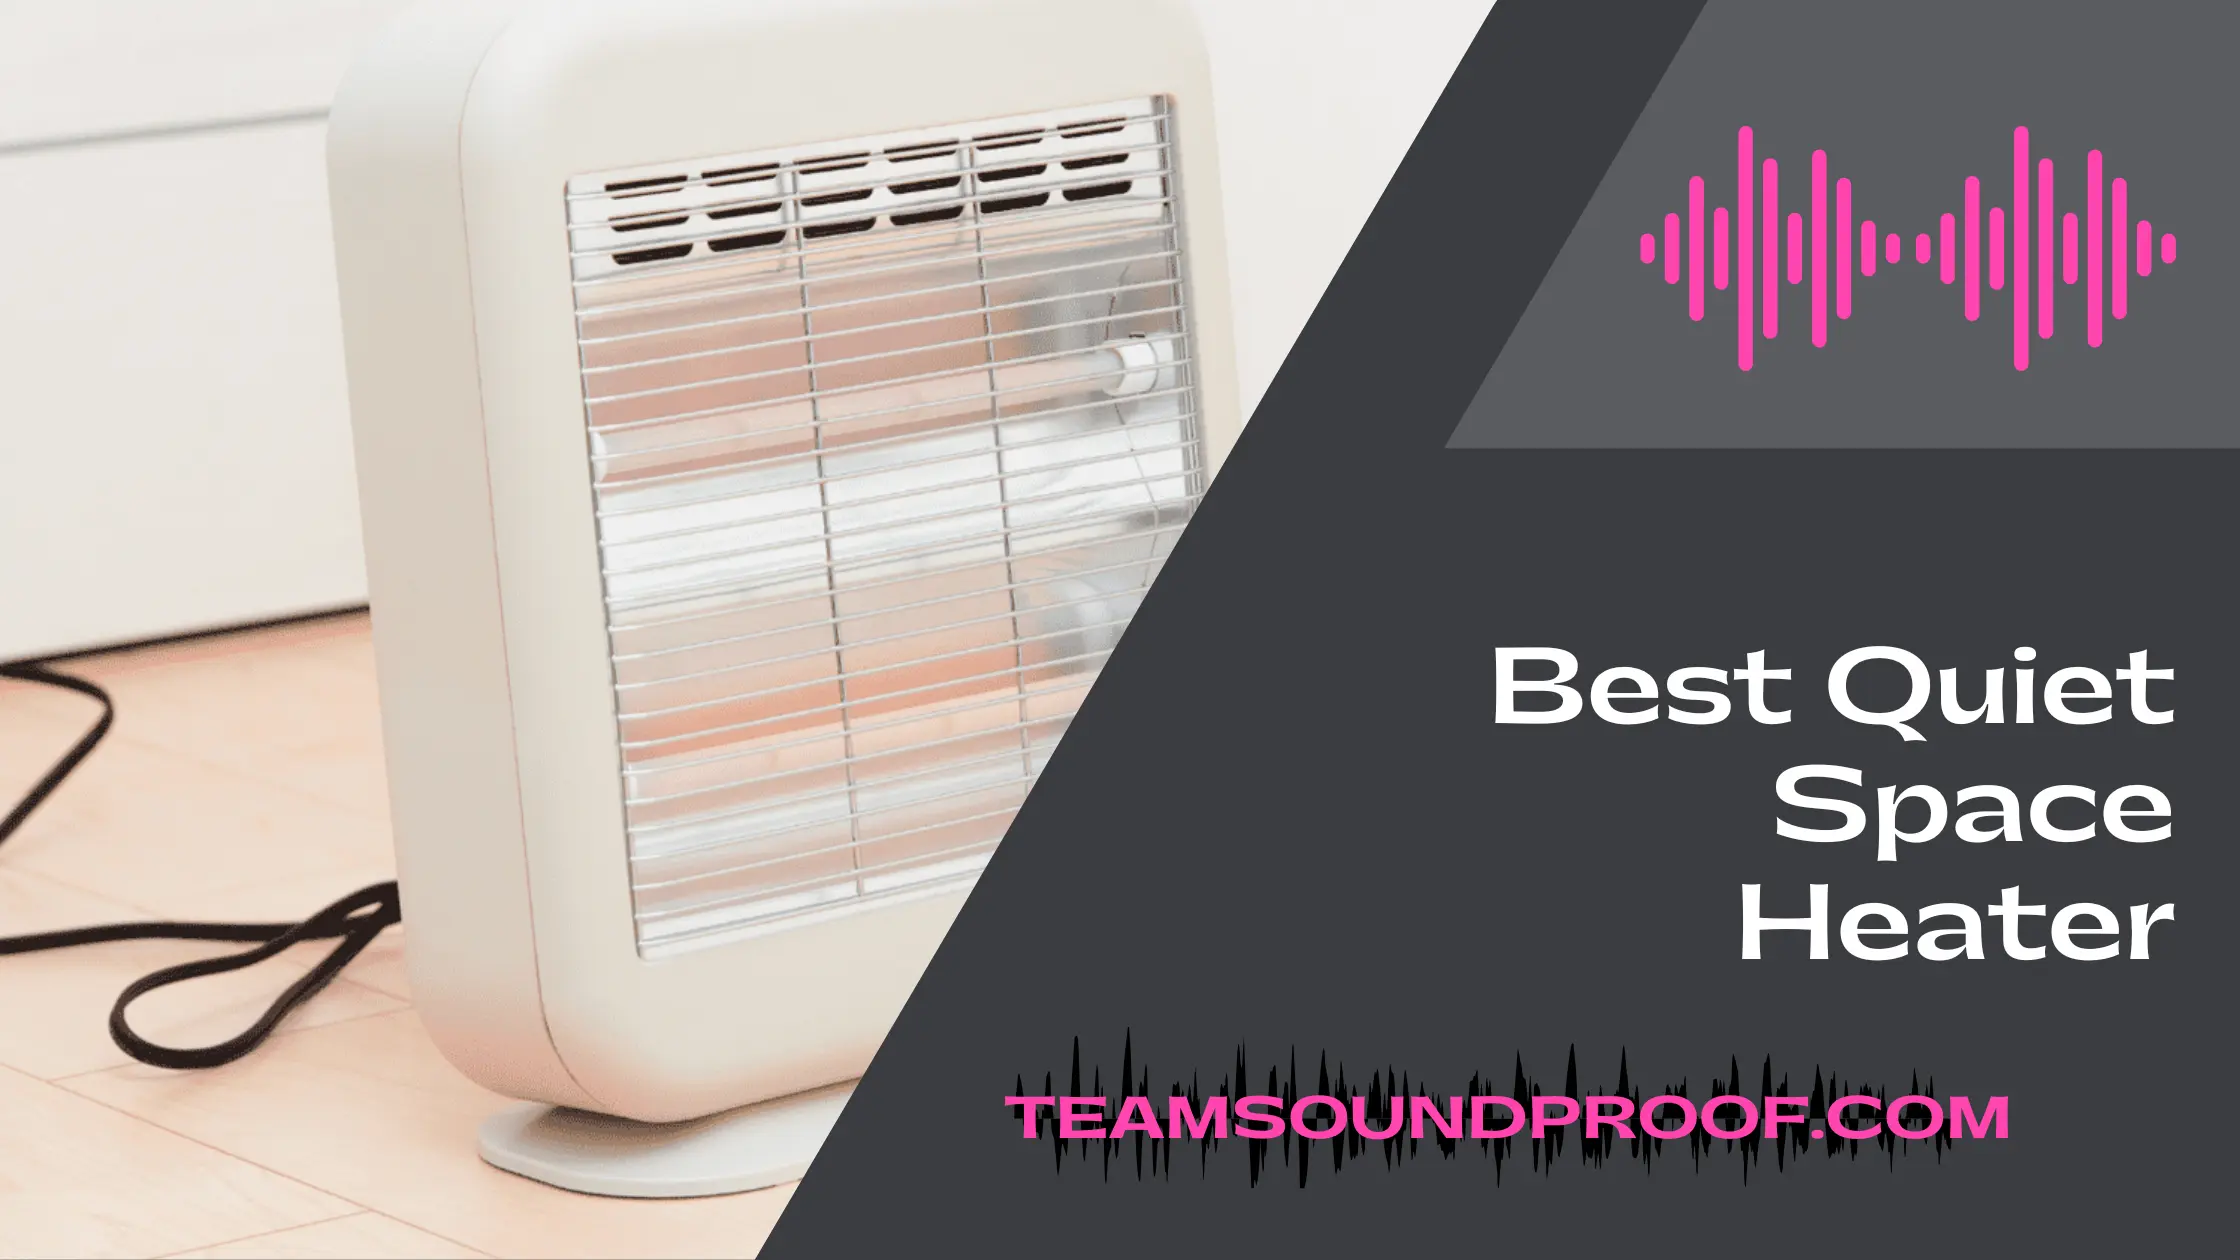 Best Quiet Space Heater - Latest Guide